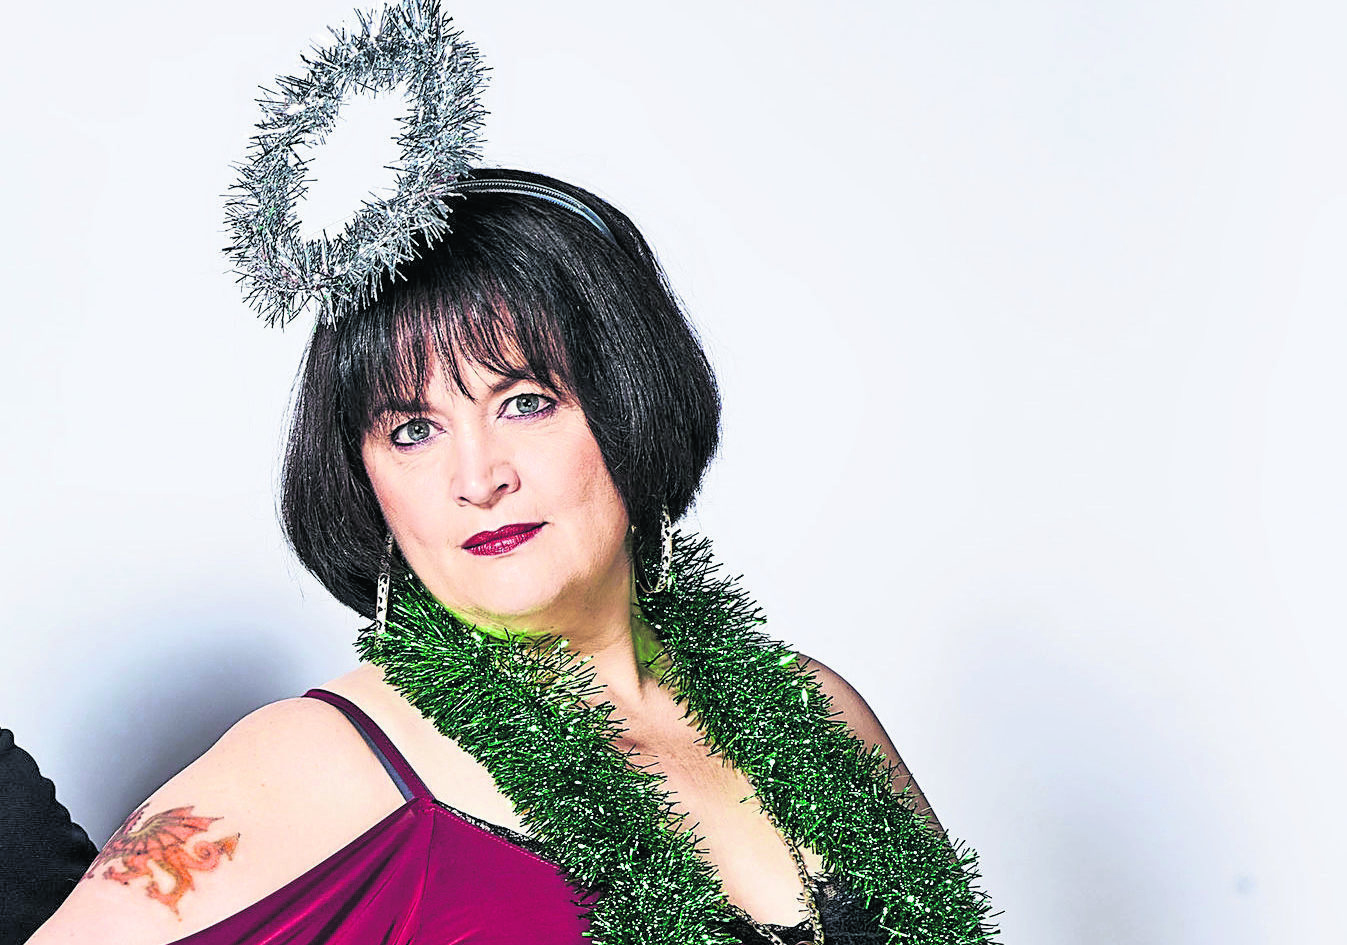 Ruth Jones as Nessa in Gavin and Stacey.